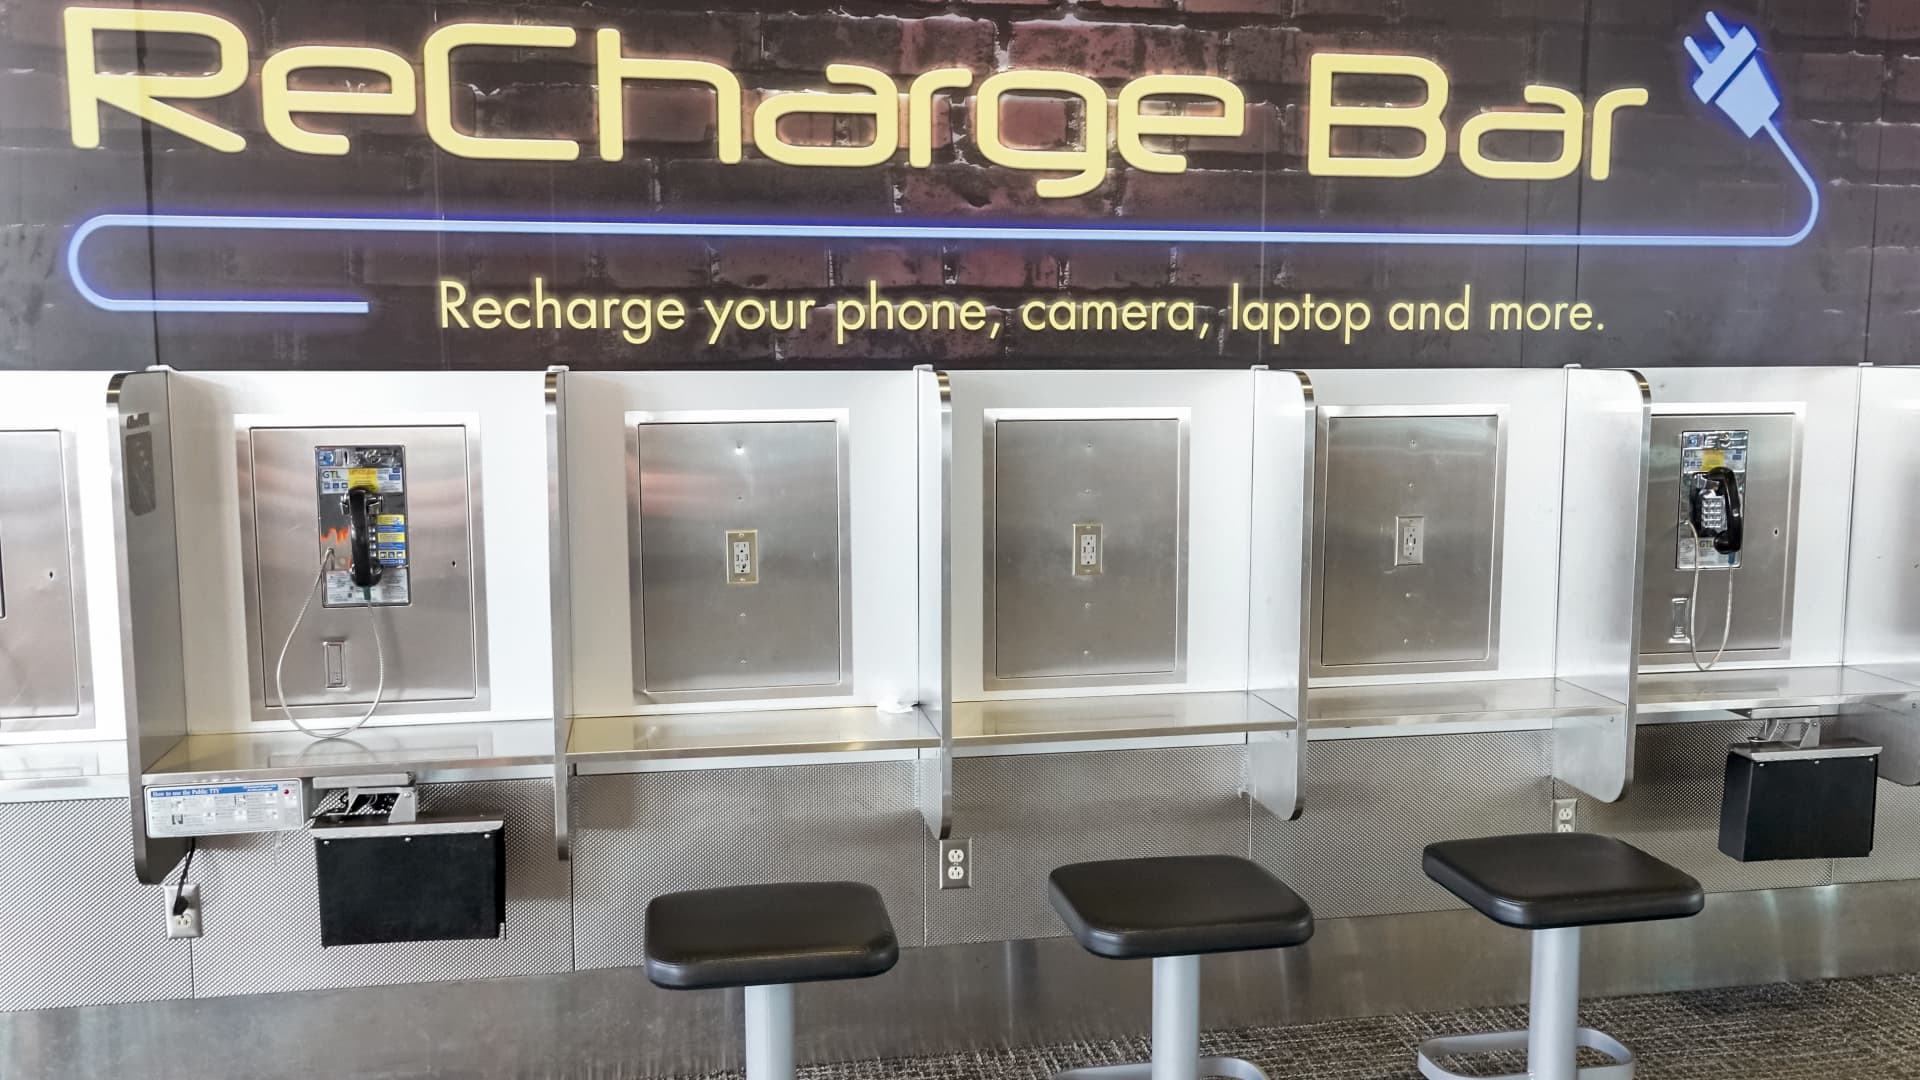 FBI says you shouldn't use public phone charging stations